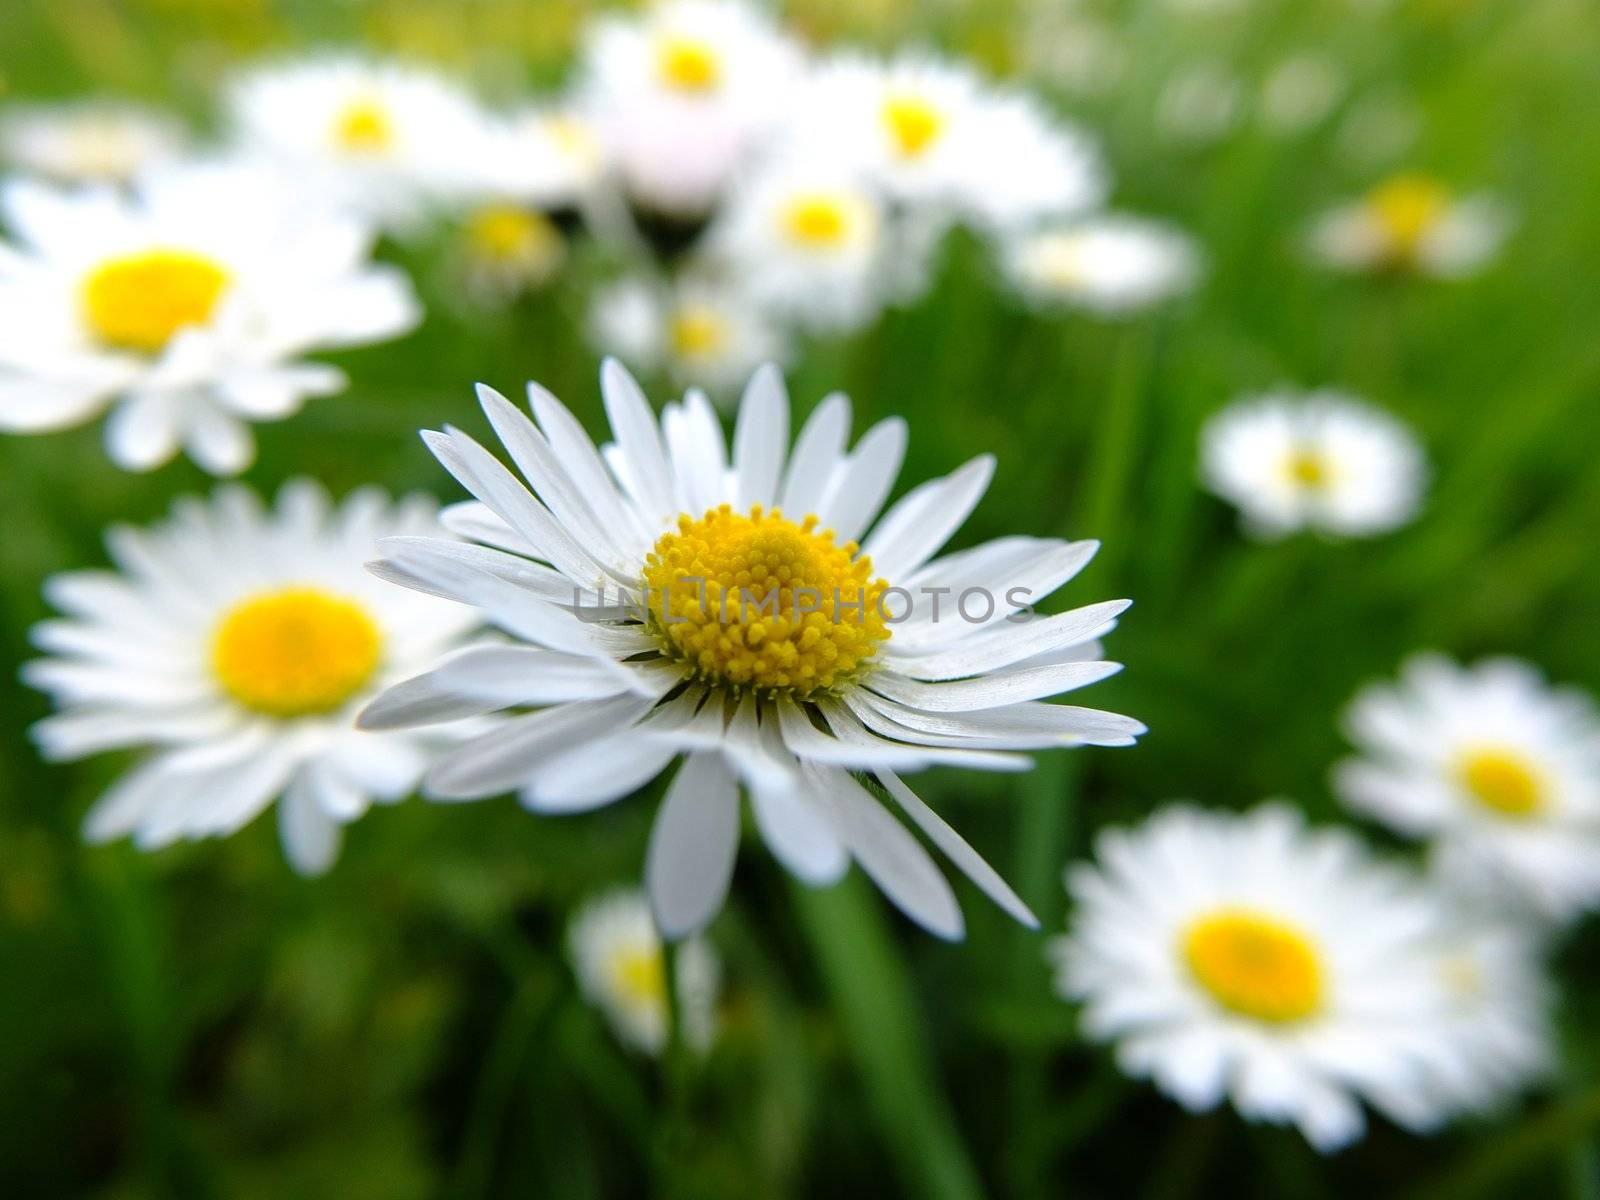 Daisies by yucas